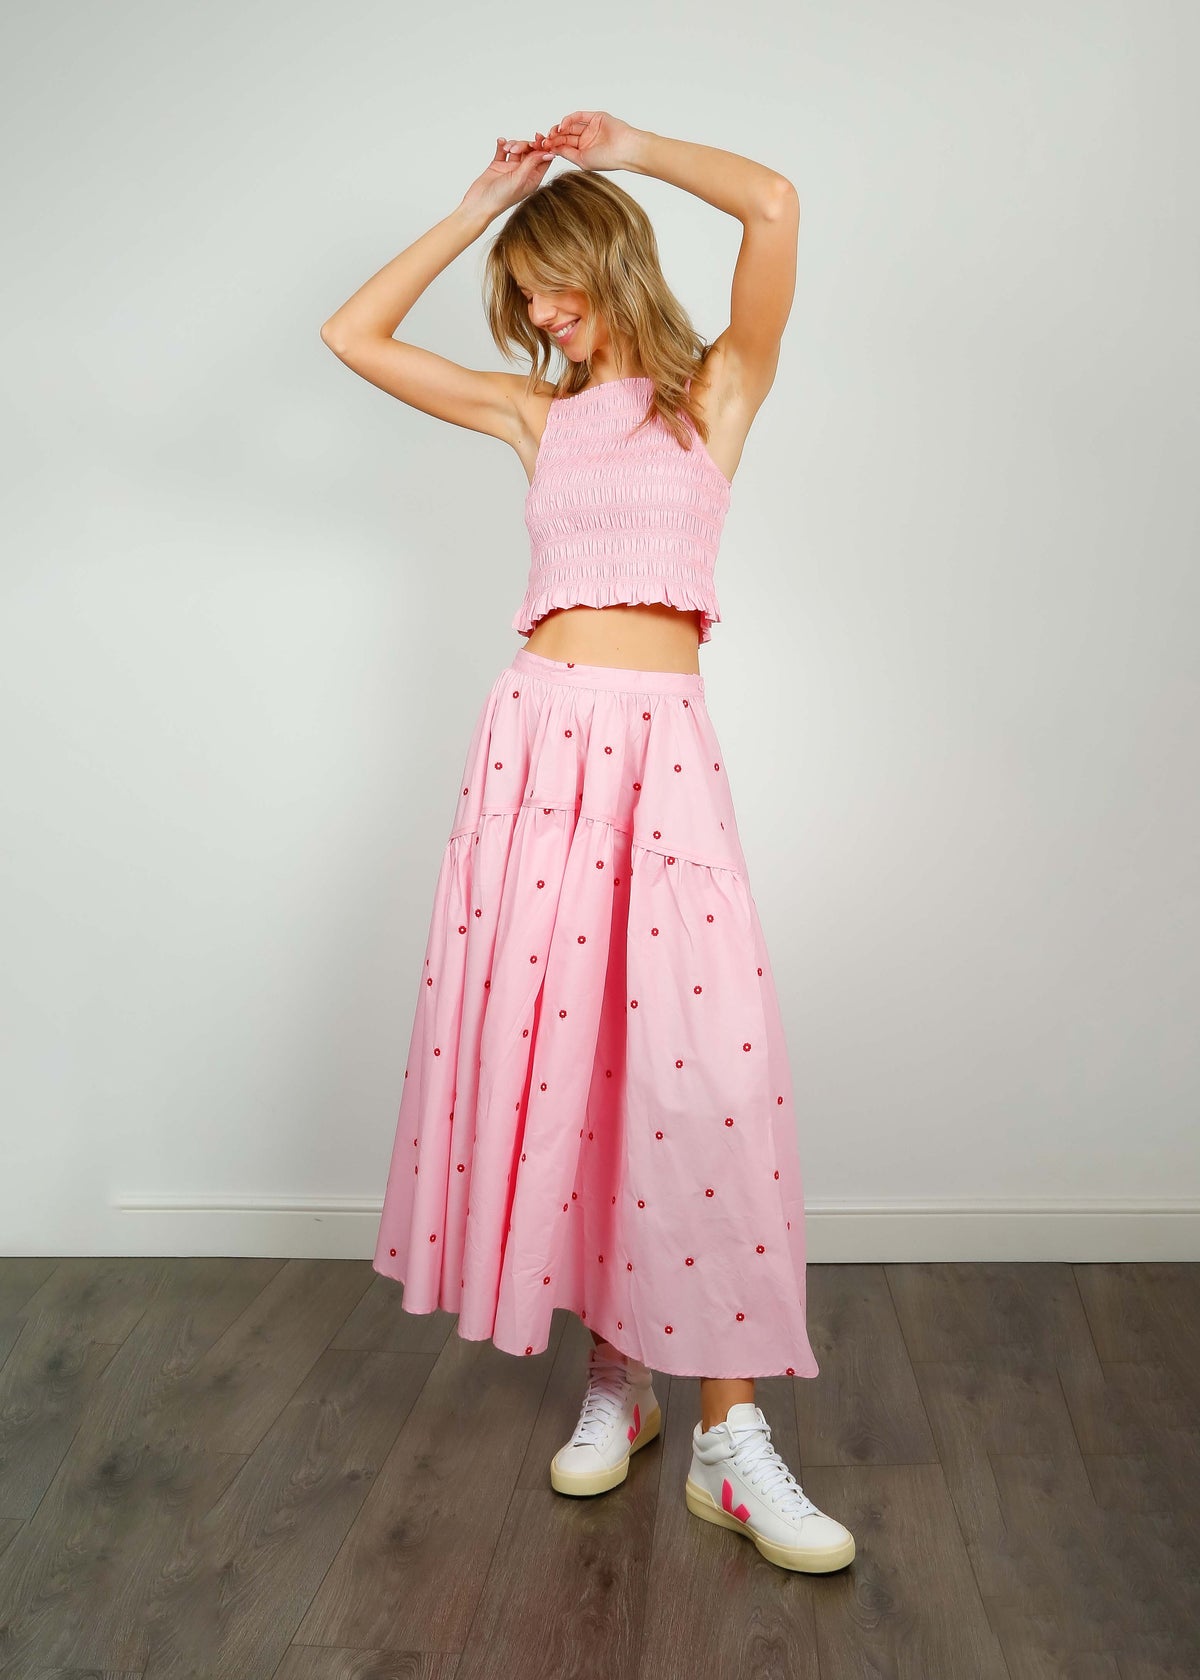 APARTMENT Elyse Skirt in Pink